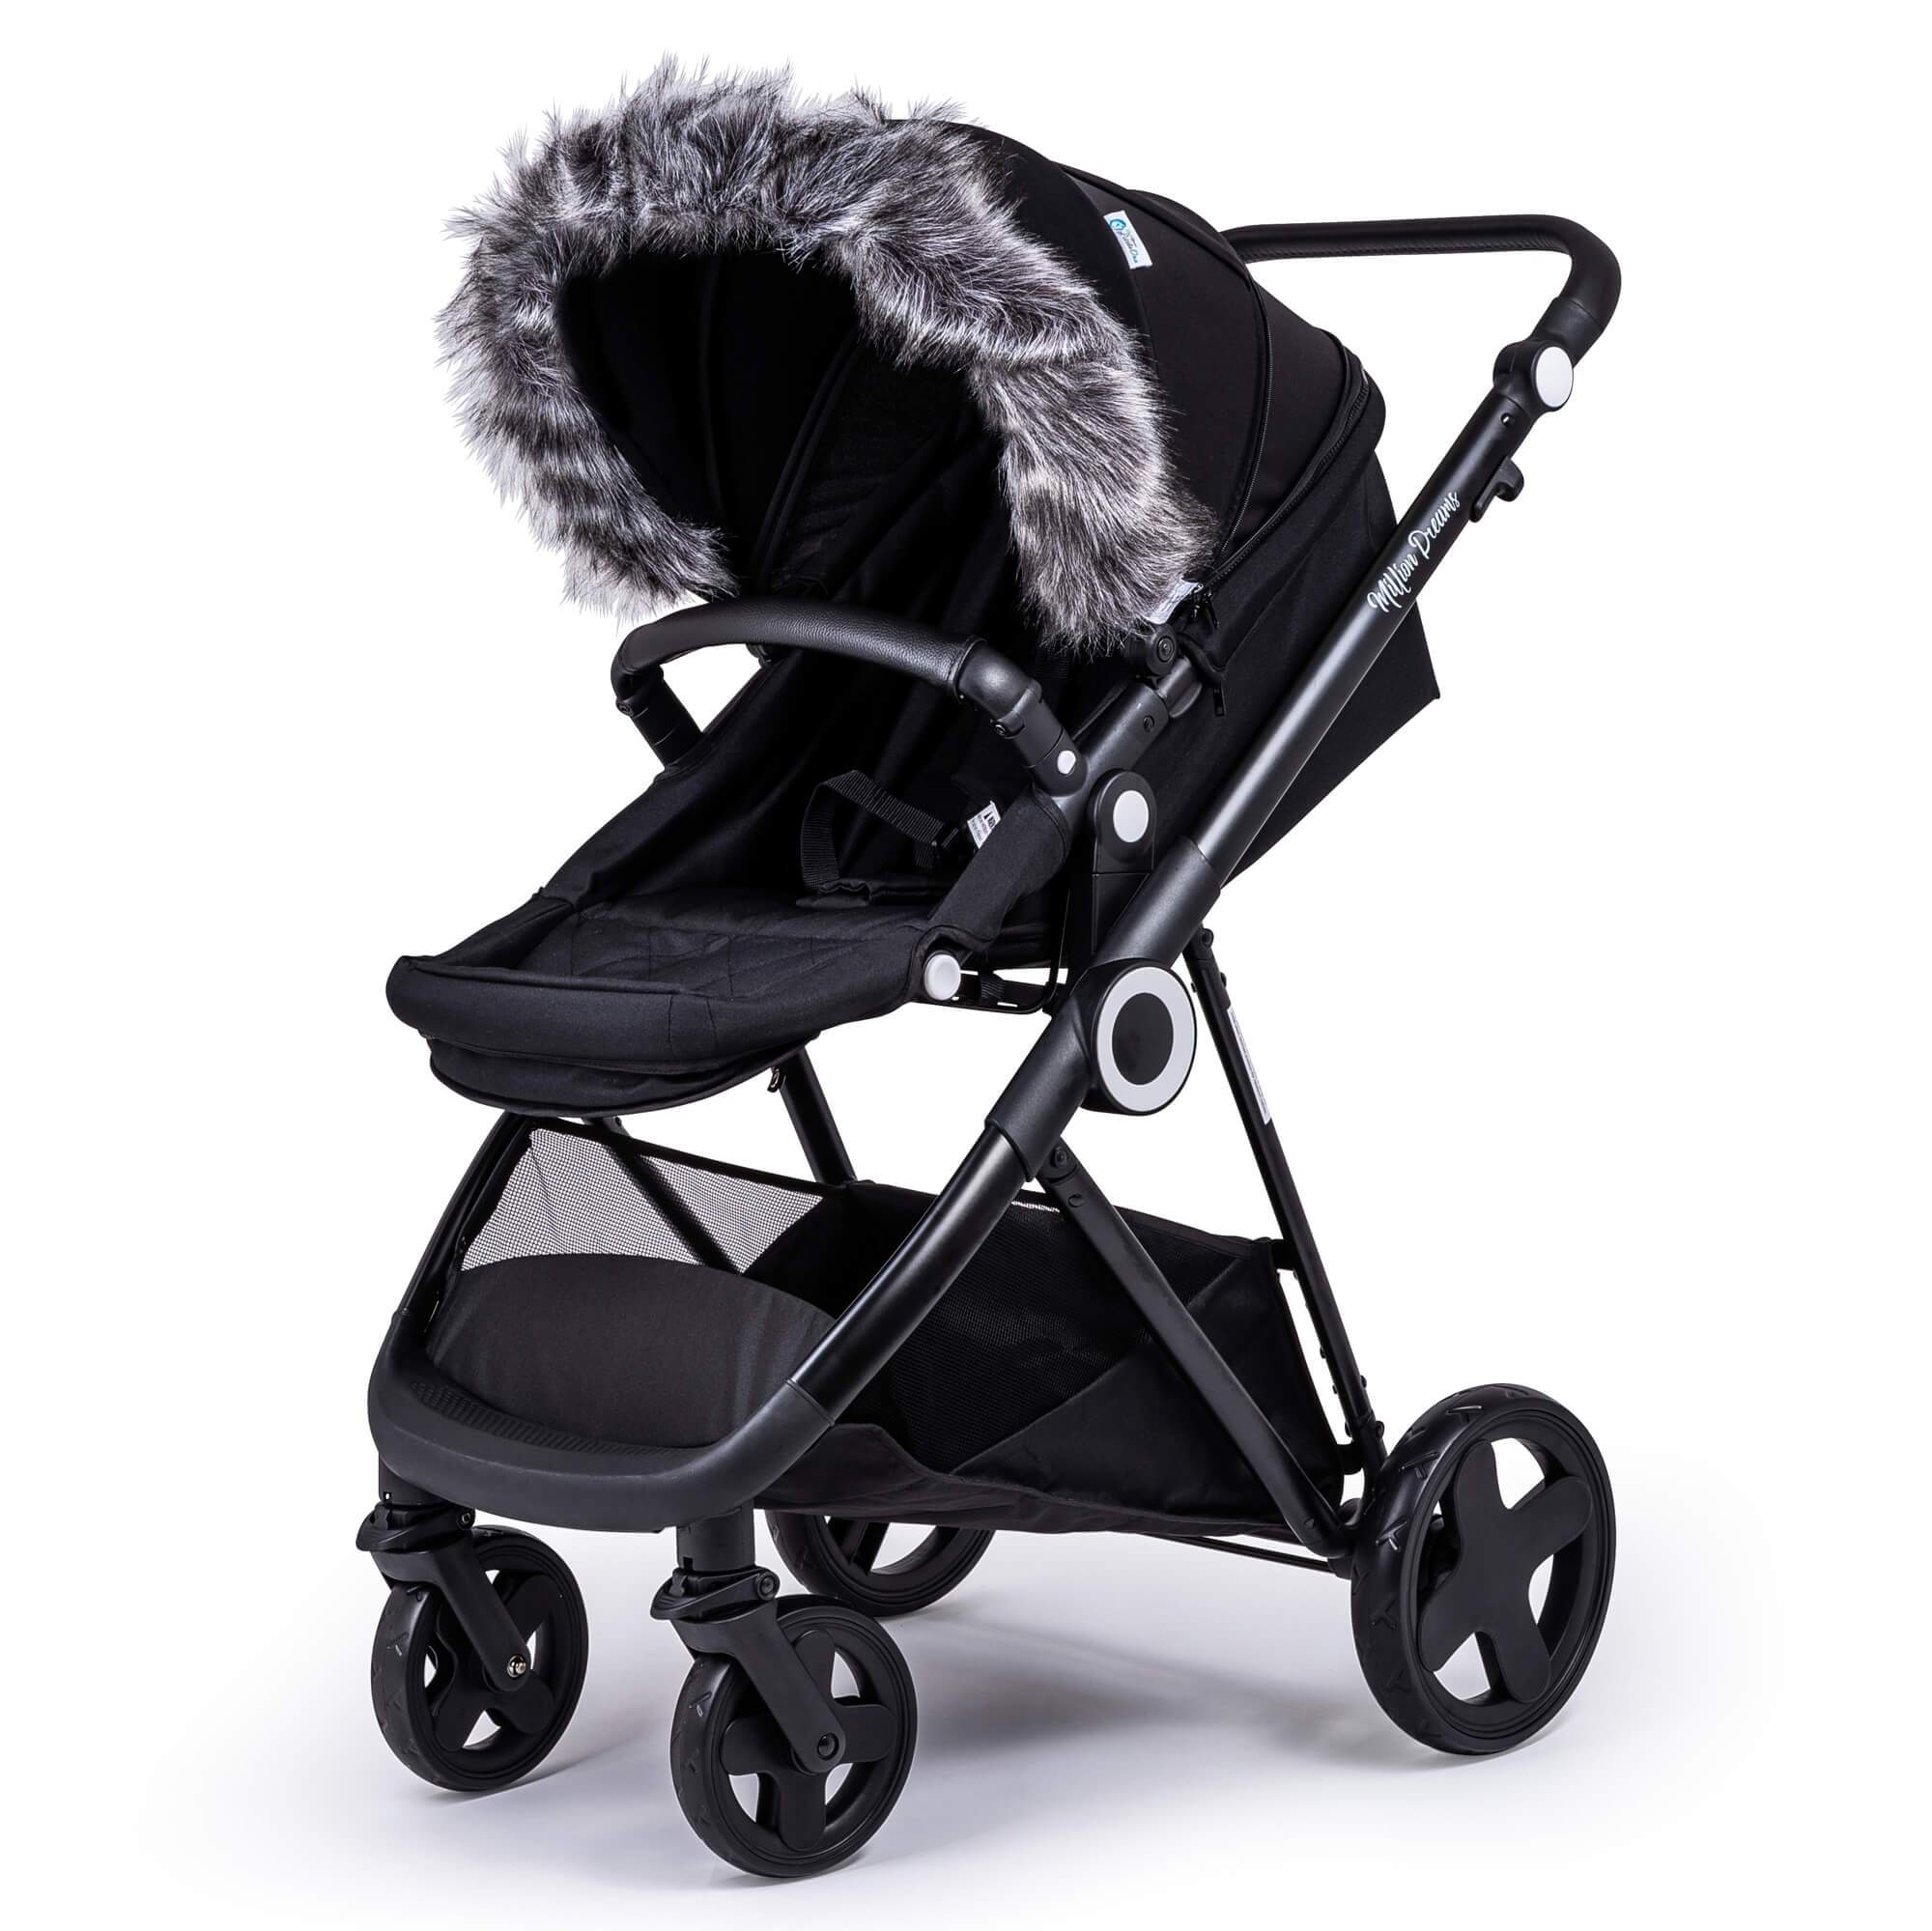 Pram Fur Hood Trim Attachment for Pushchair Compatible with Esprit - Dark Grey / Fits All Models | For Your Little One